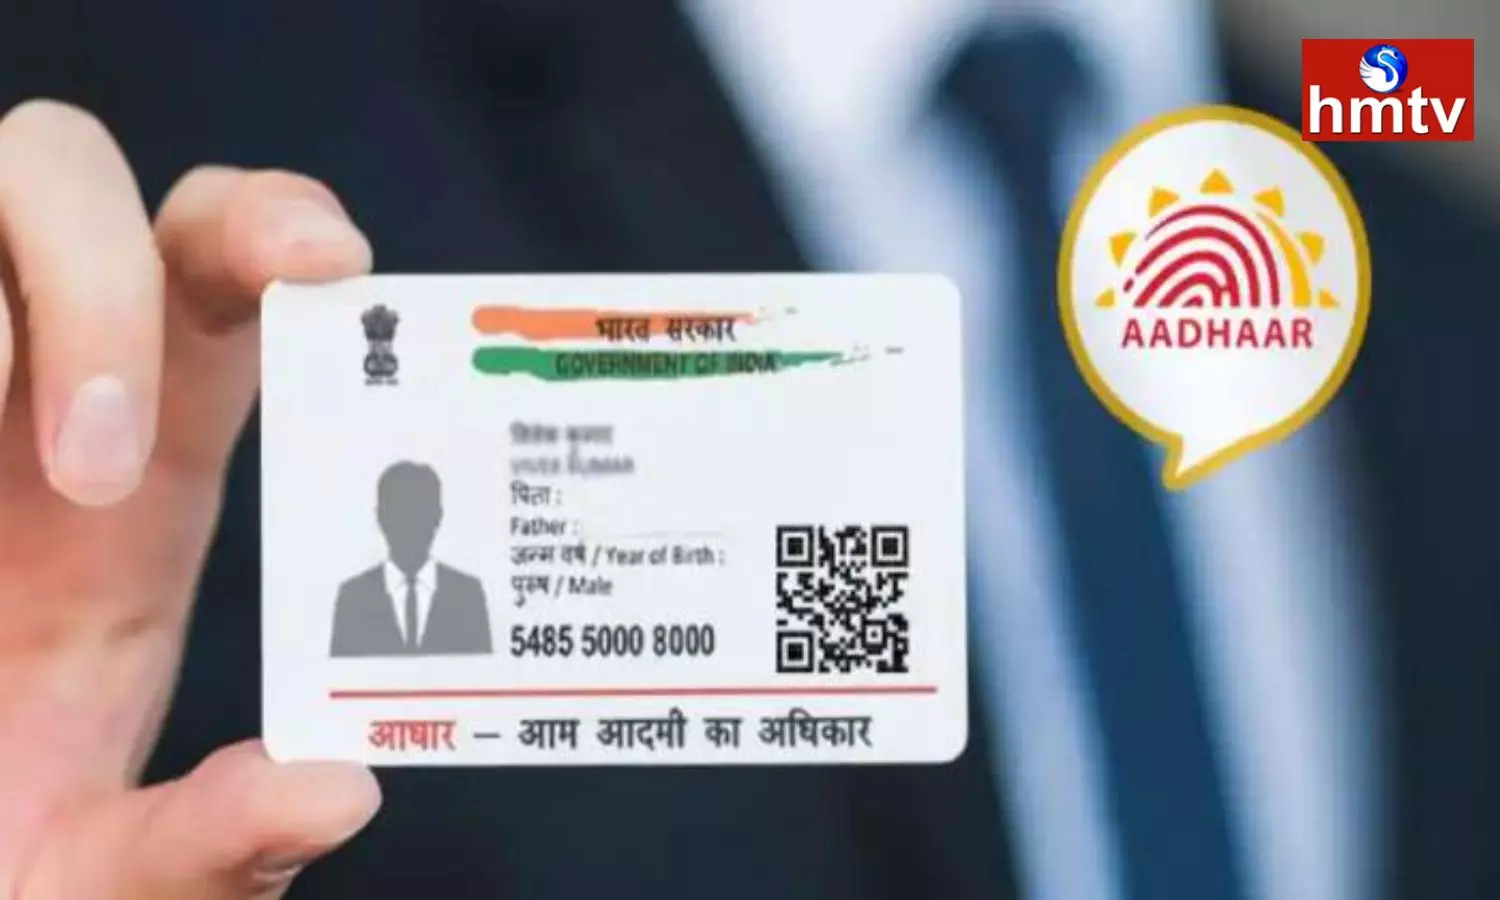 UIDAI has warned that strict action will be taken against any agency charging extra for updating Aadhaar